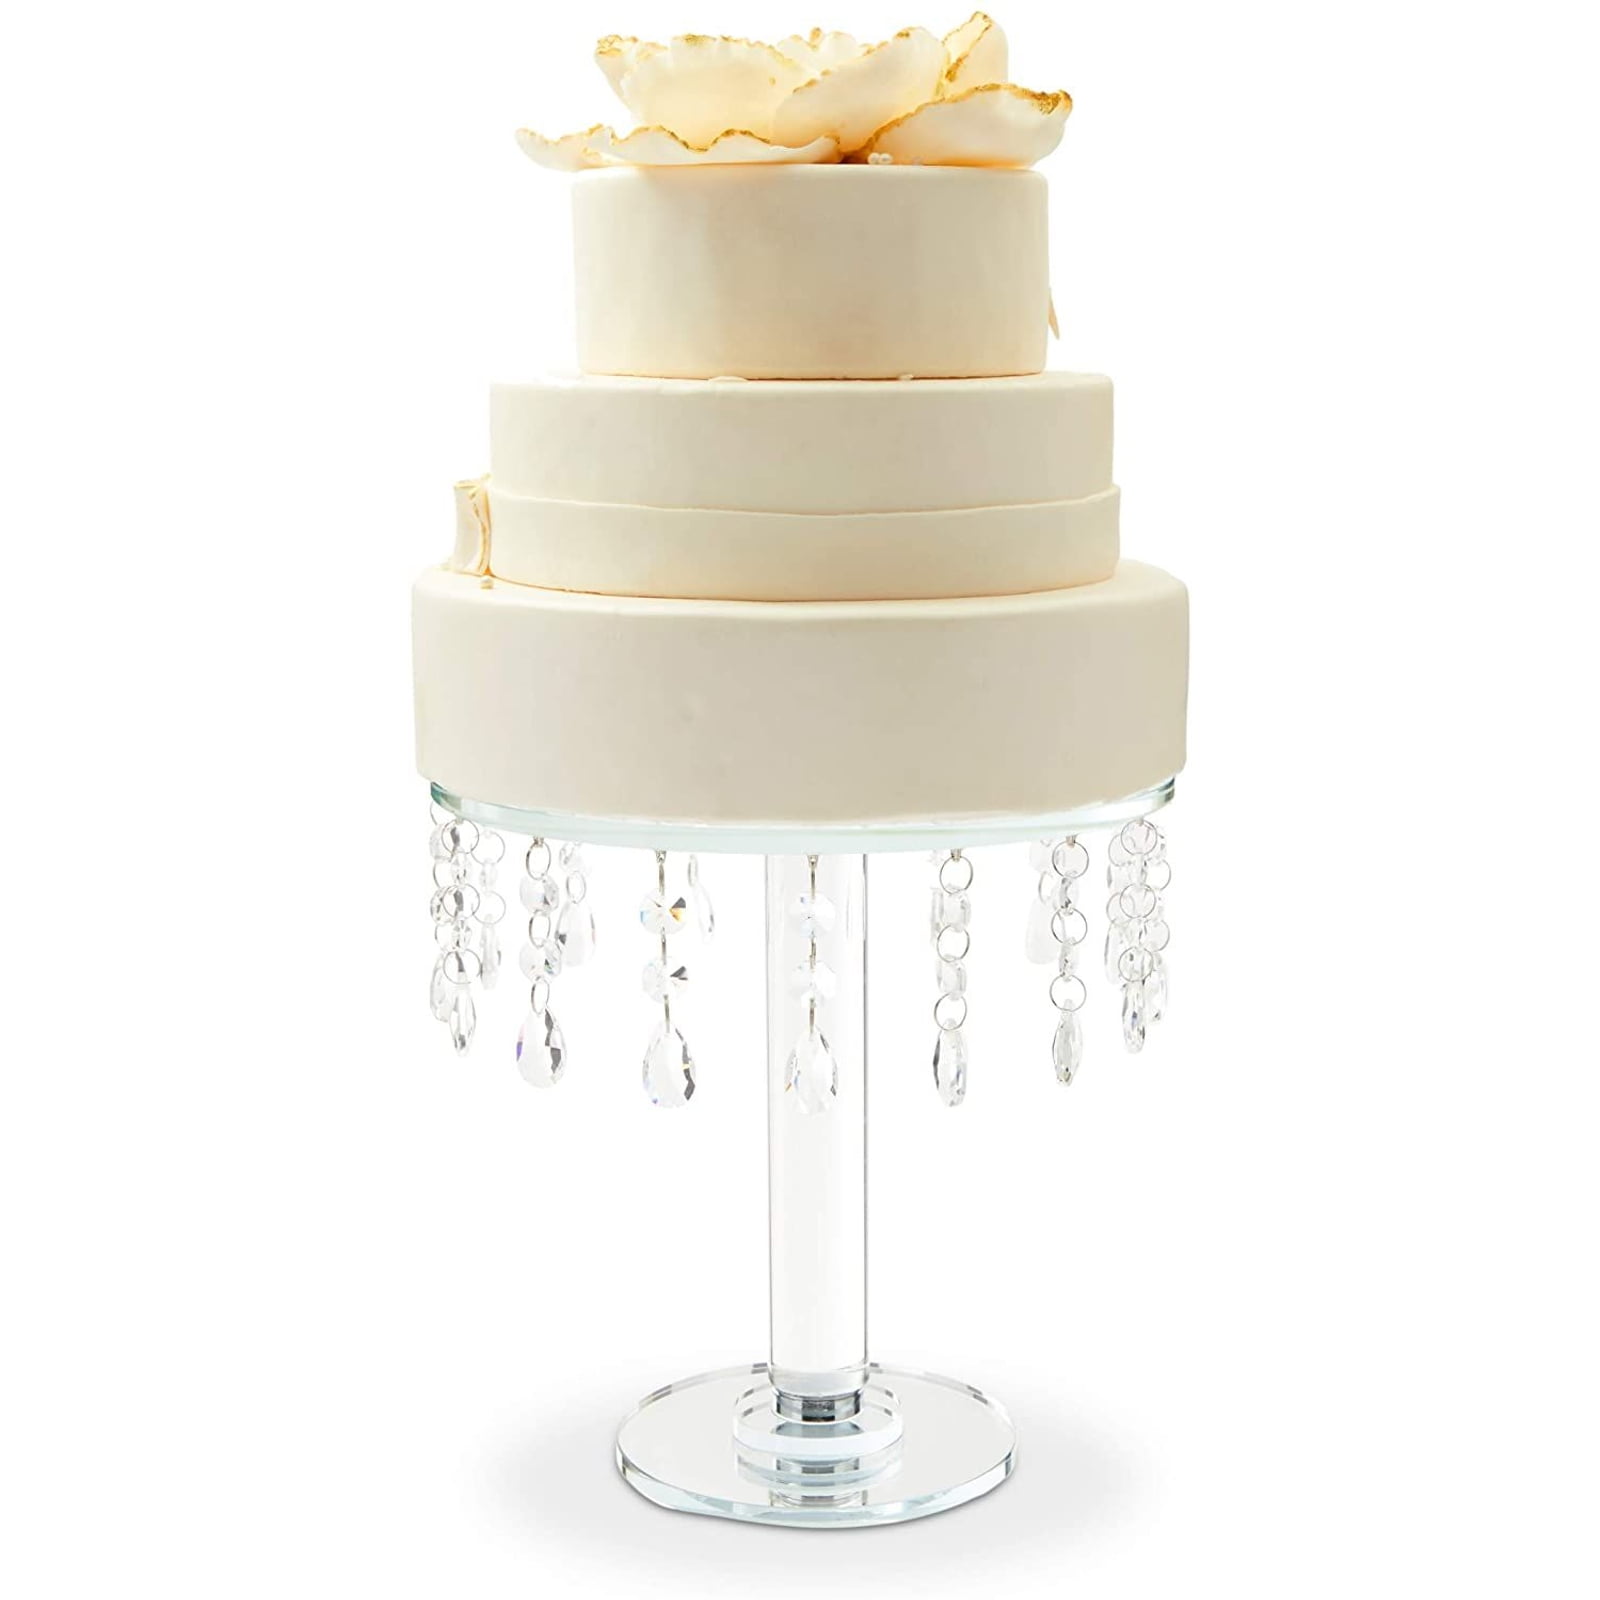 Elegant Tiered Cake Stand for Weddings and Special Occasions a Beautiful Wilton Roman Column Tiered Wedding Cake Stand 8-Piece